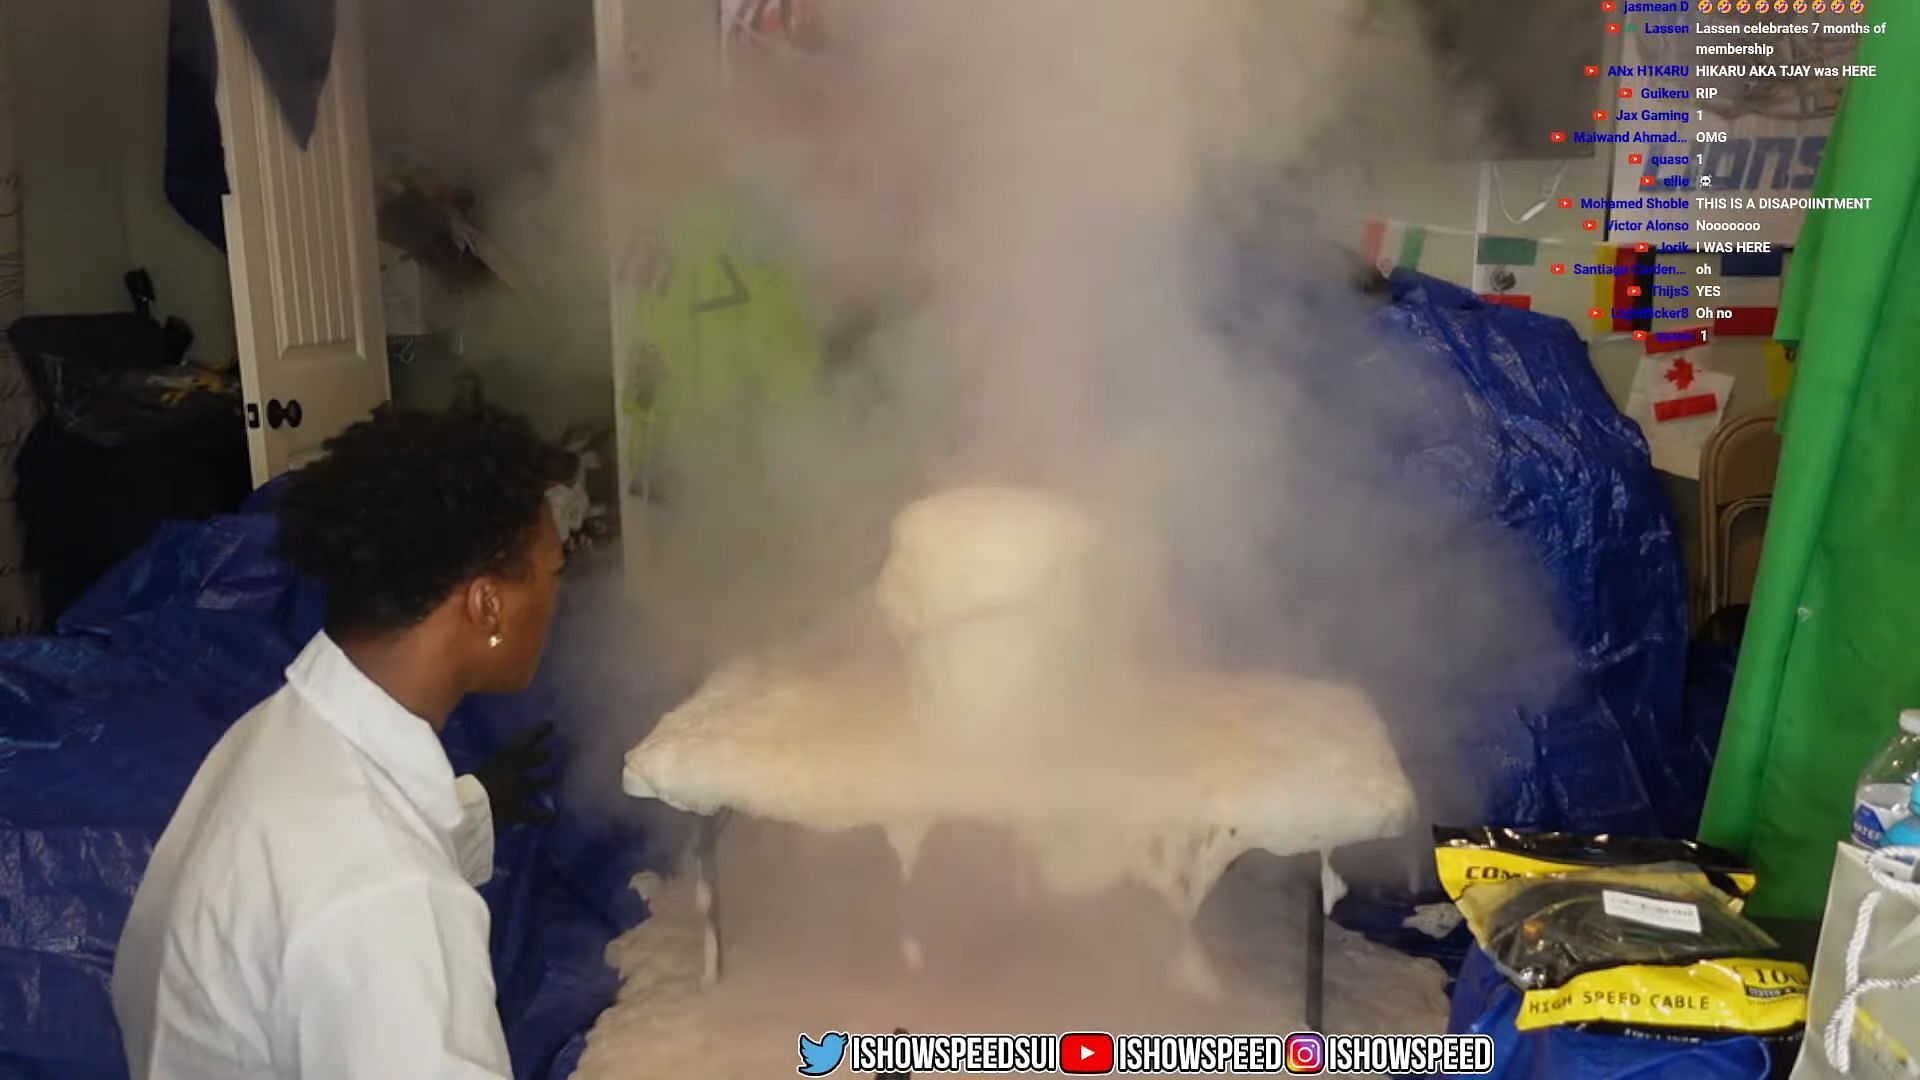 What happened to IShowSpeed? Streamer needed paramedic help after Elephant  Toothpaste experiment went wrong